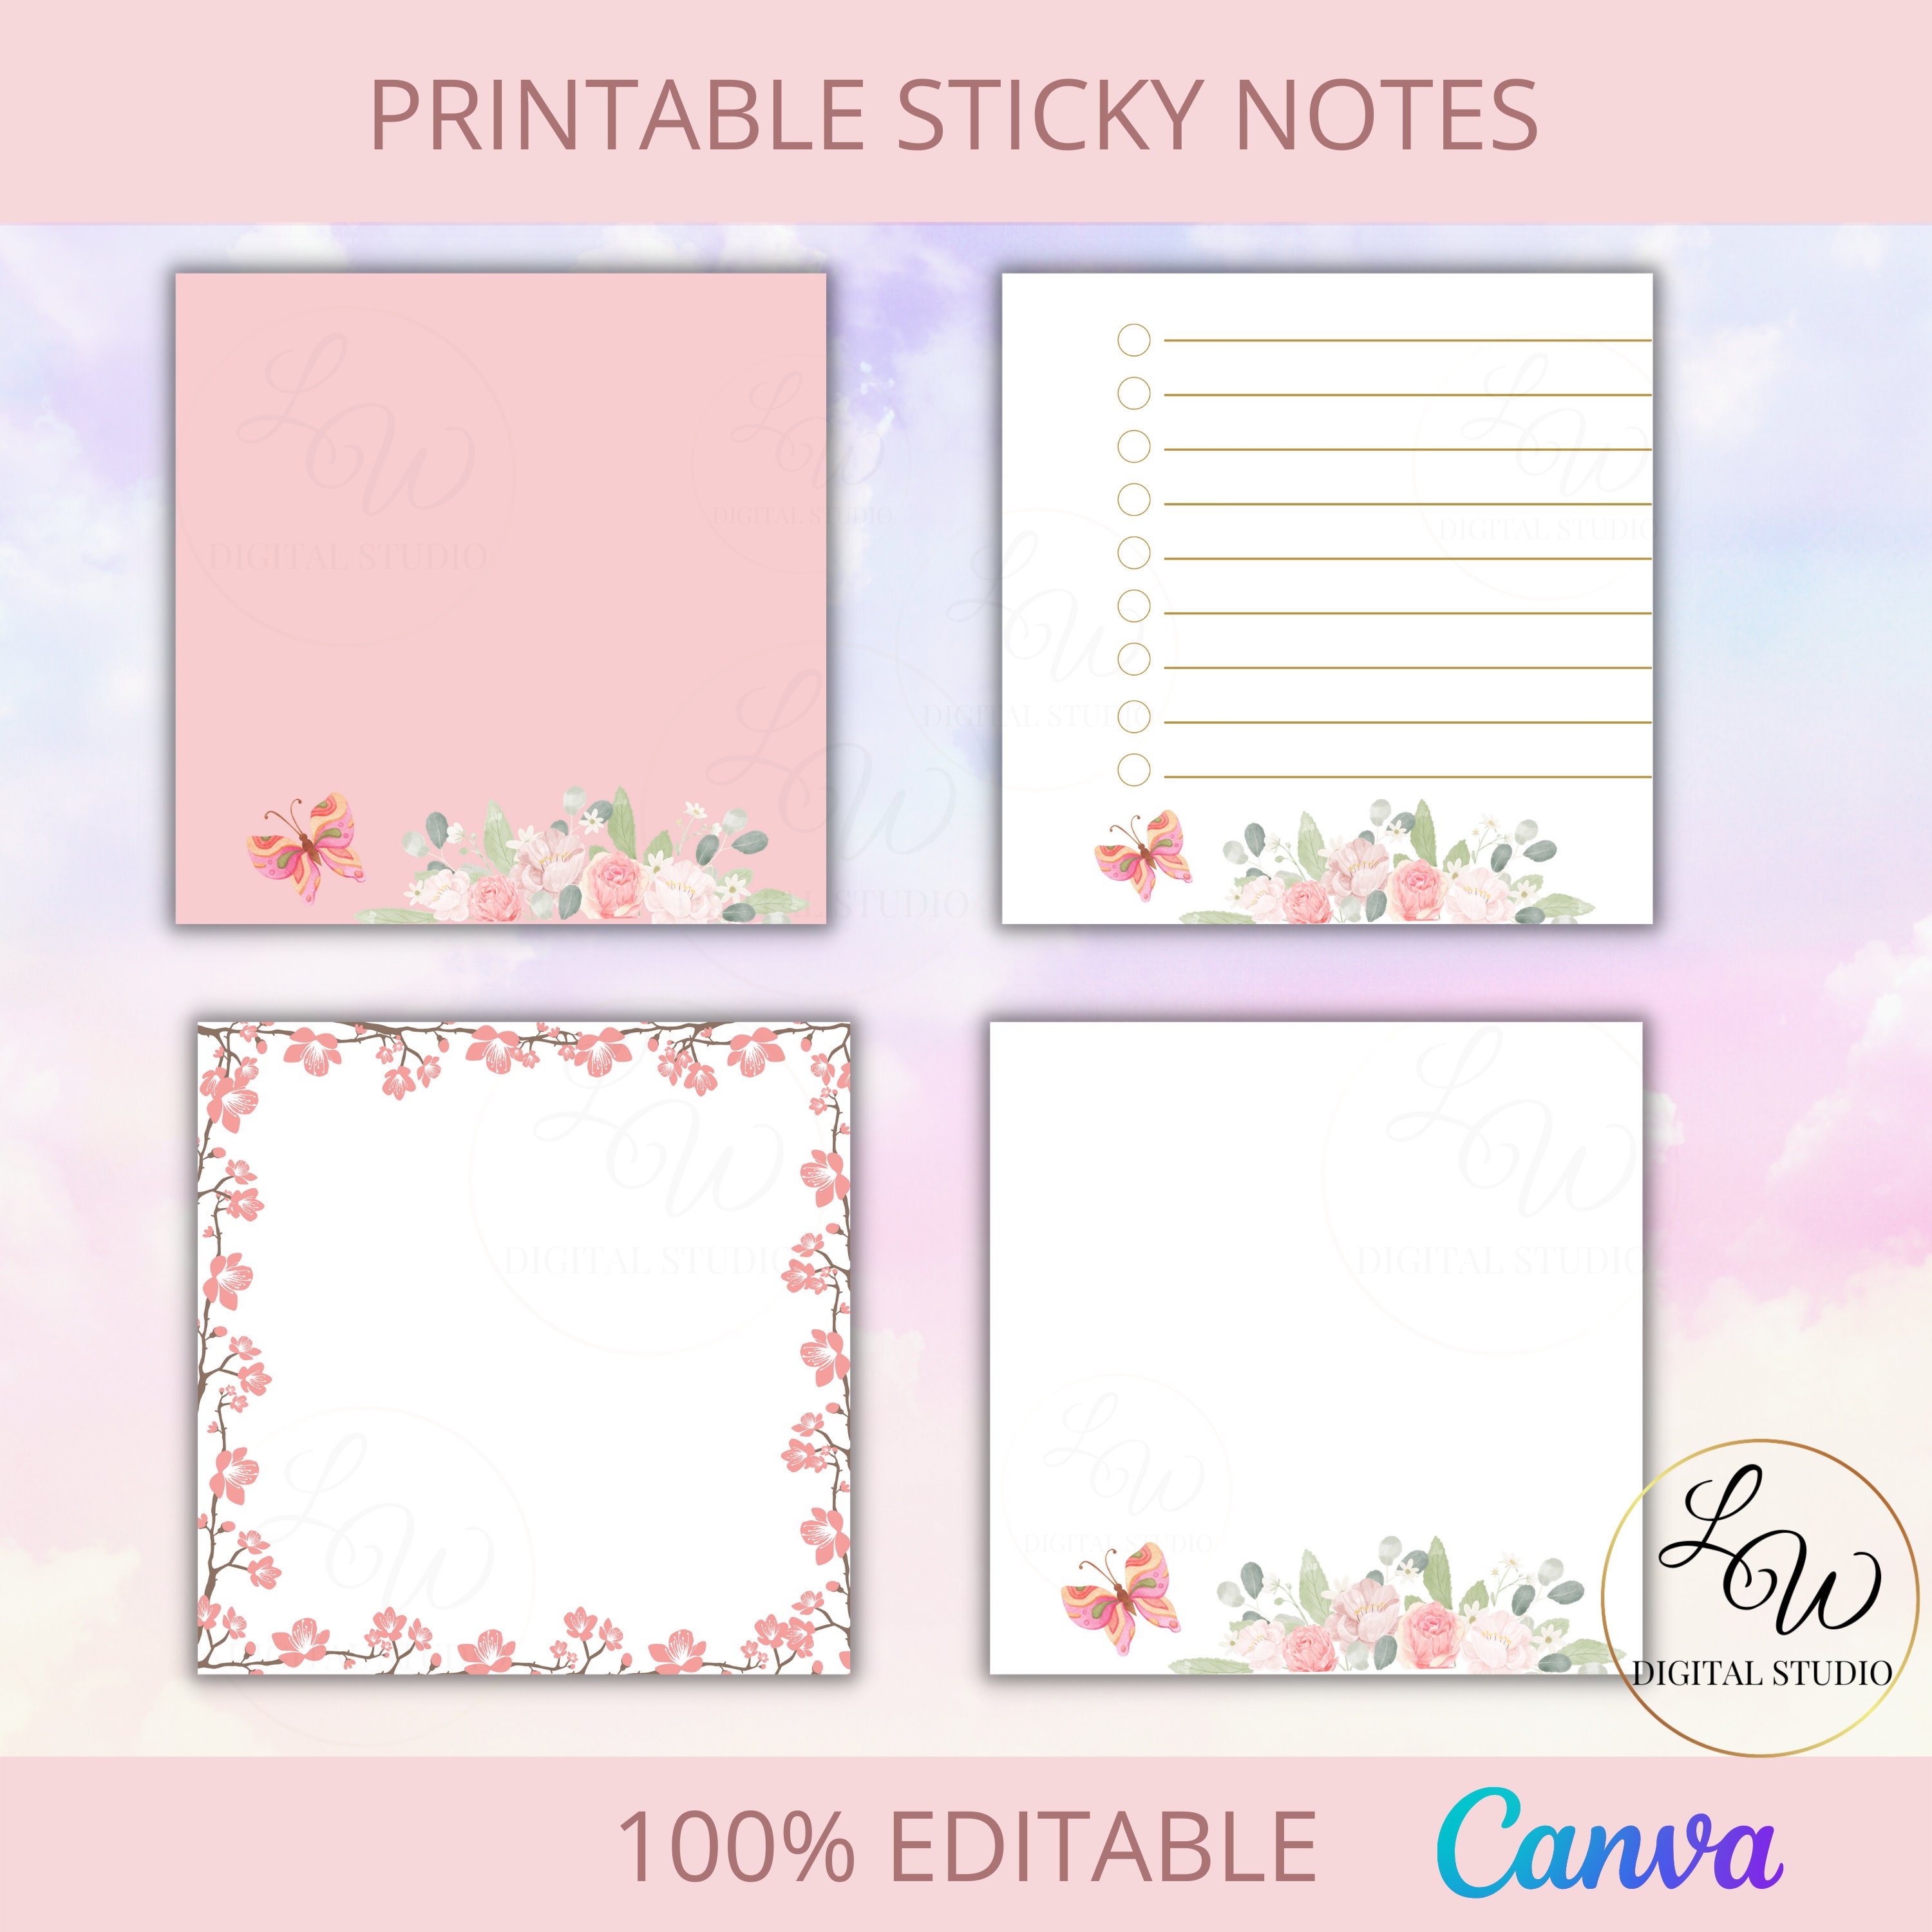 Design Sticky note pads online with free templates!